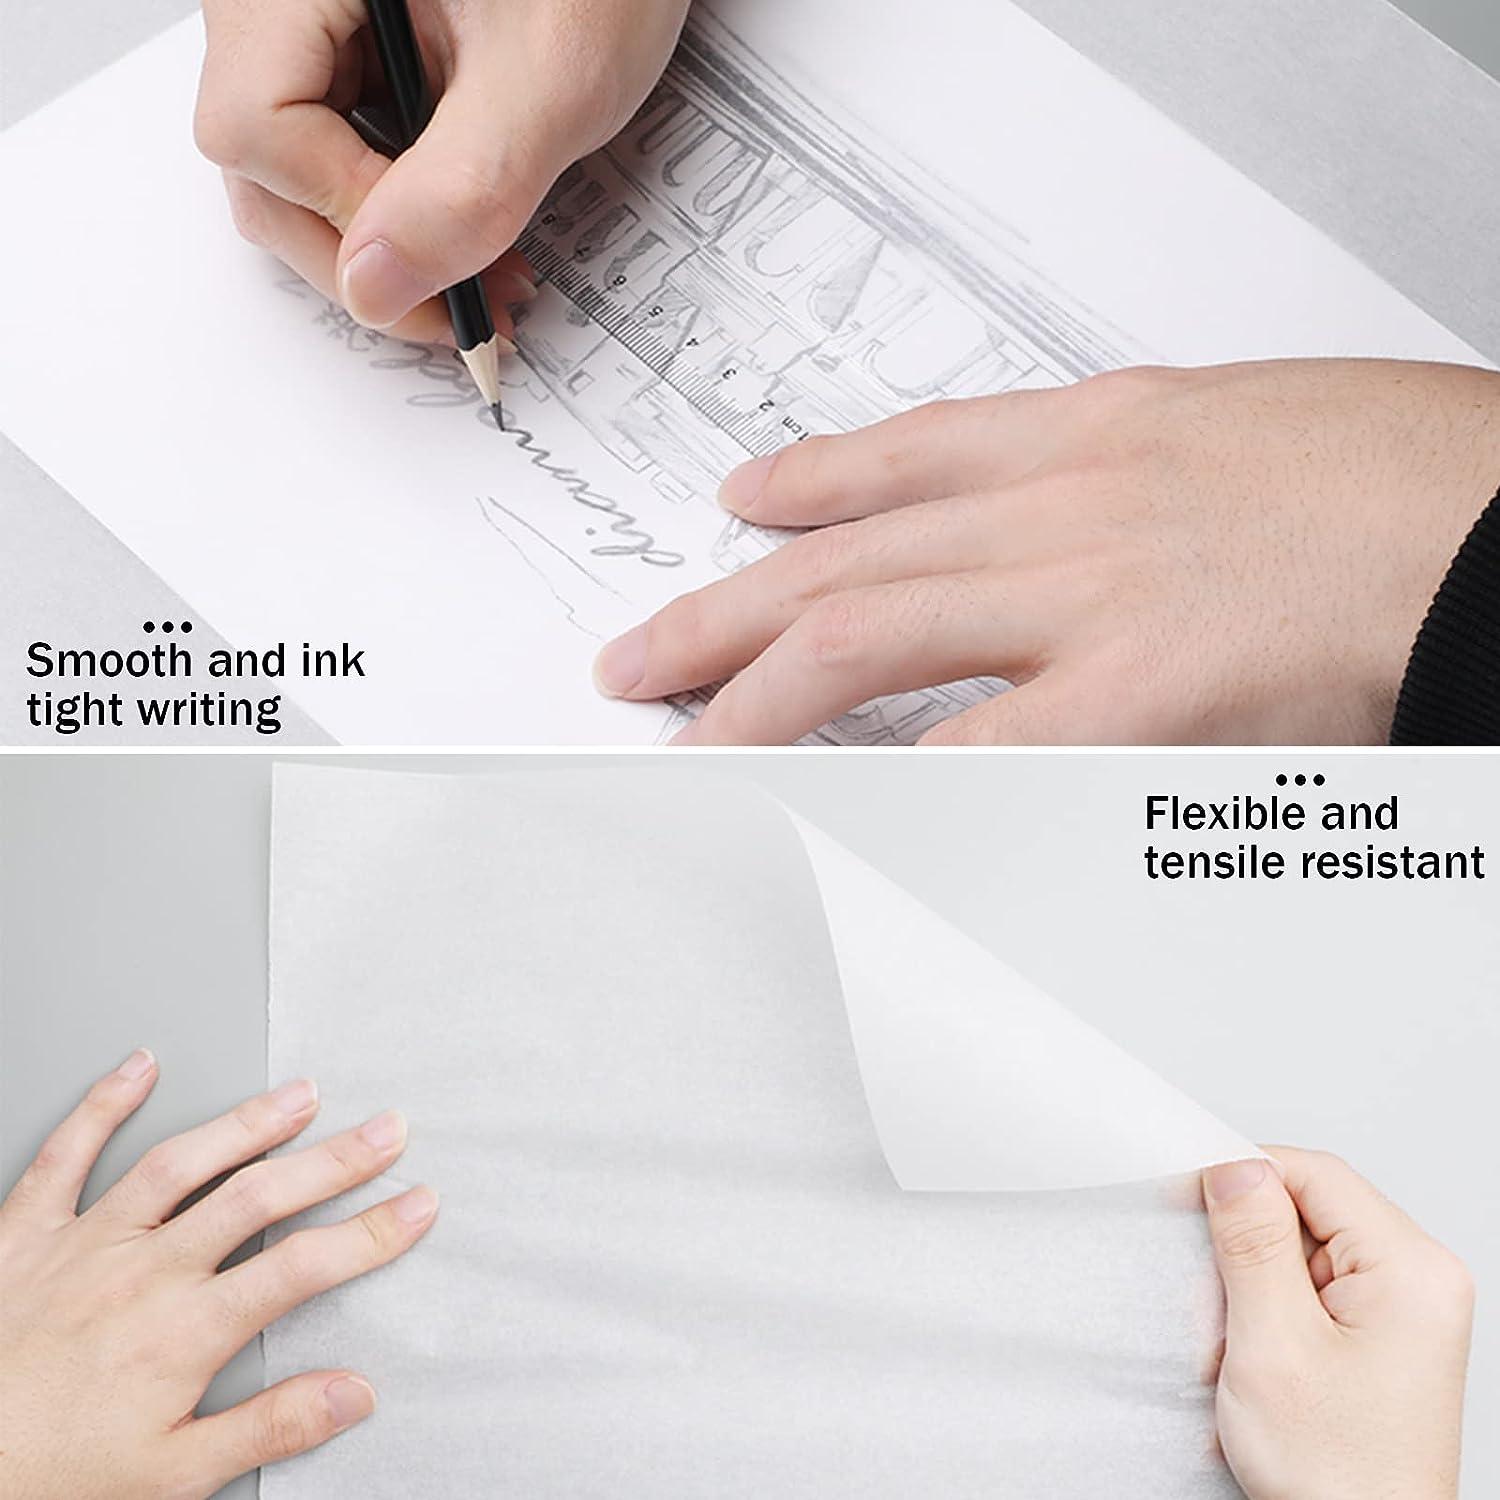 Sewing Pattern Paper - Lightweight Tracing Paper